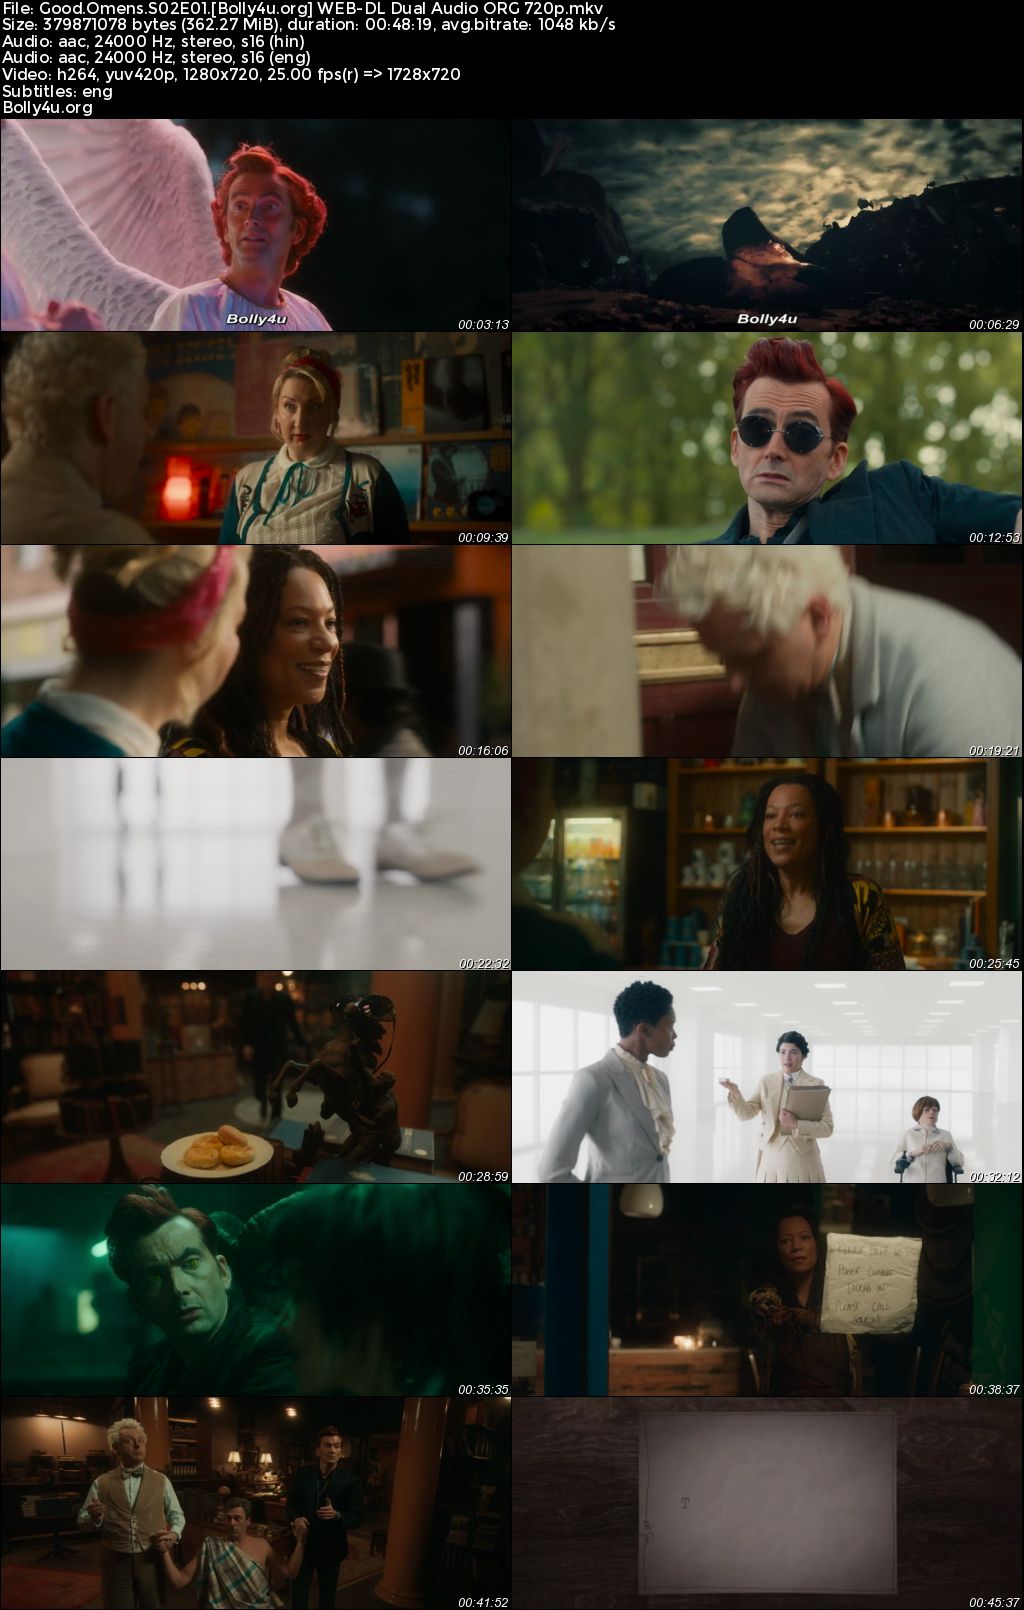 Good Omens 2023 WEB-DL Hindi Dual Audio ORG S02 Complete Download 720p 480p